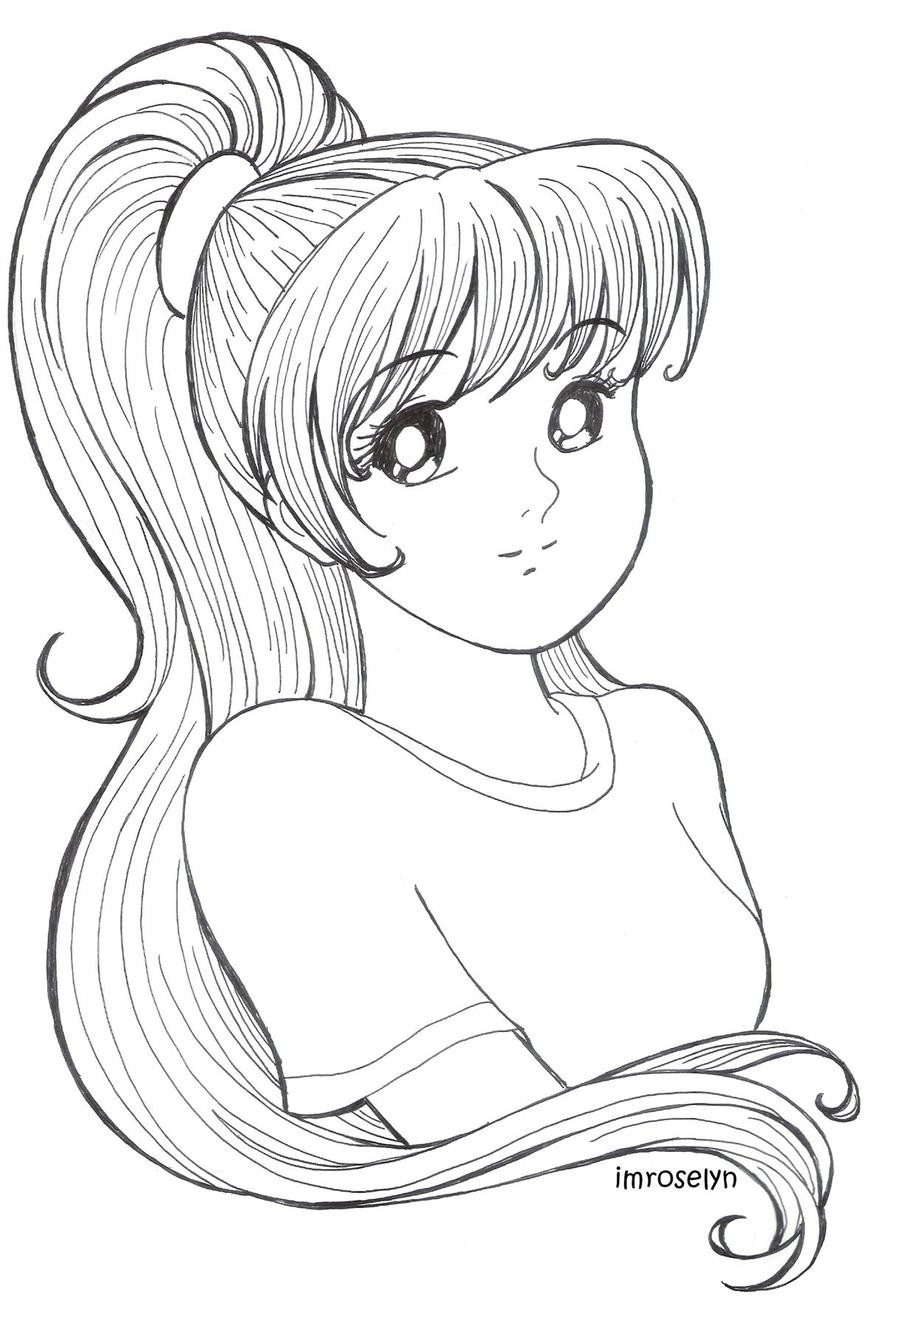 Anime Girls Coloring Pages
 Anime Girl Coloring by Nyleamoc on DeviantArt